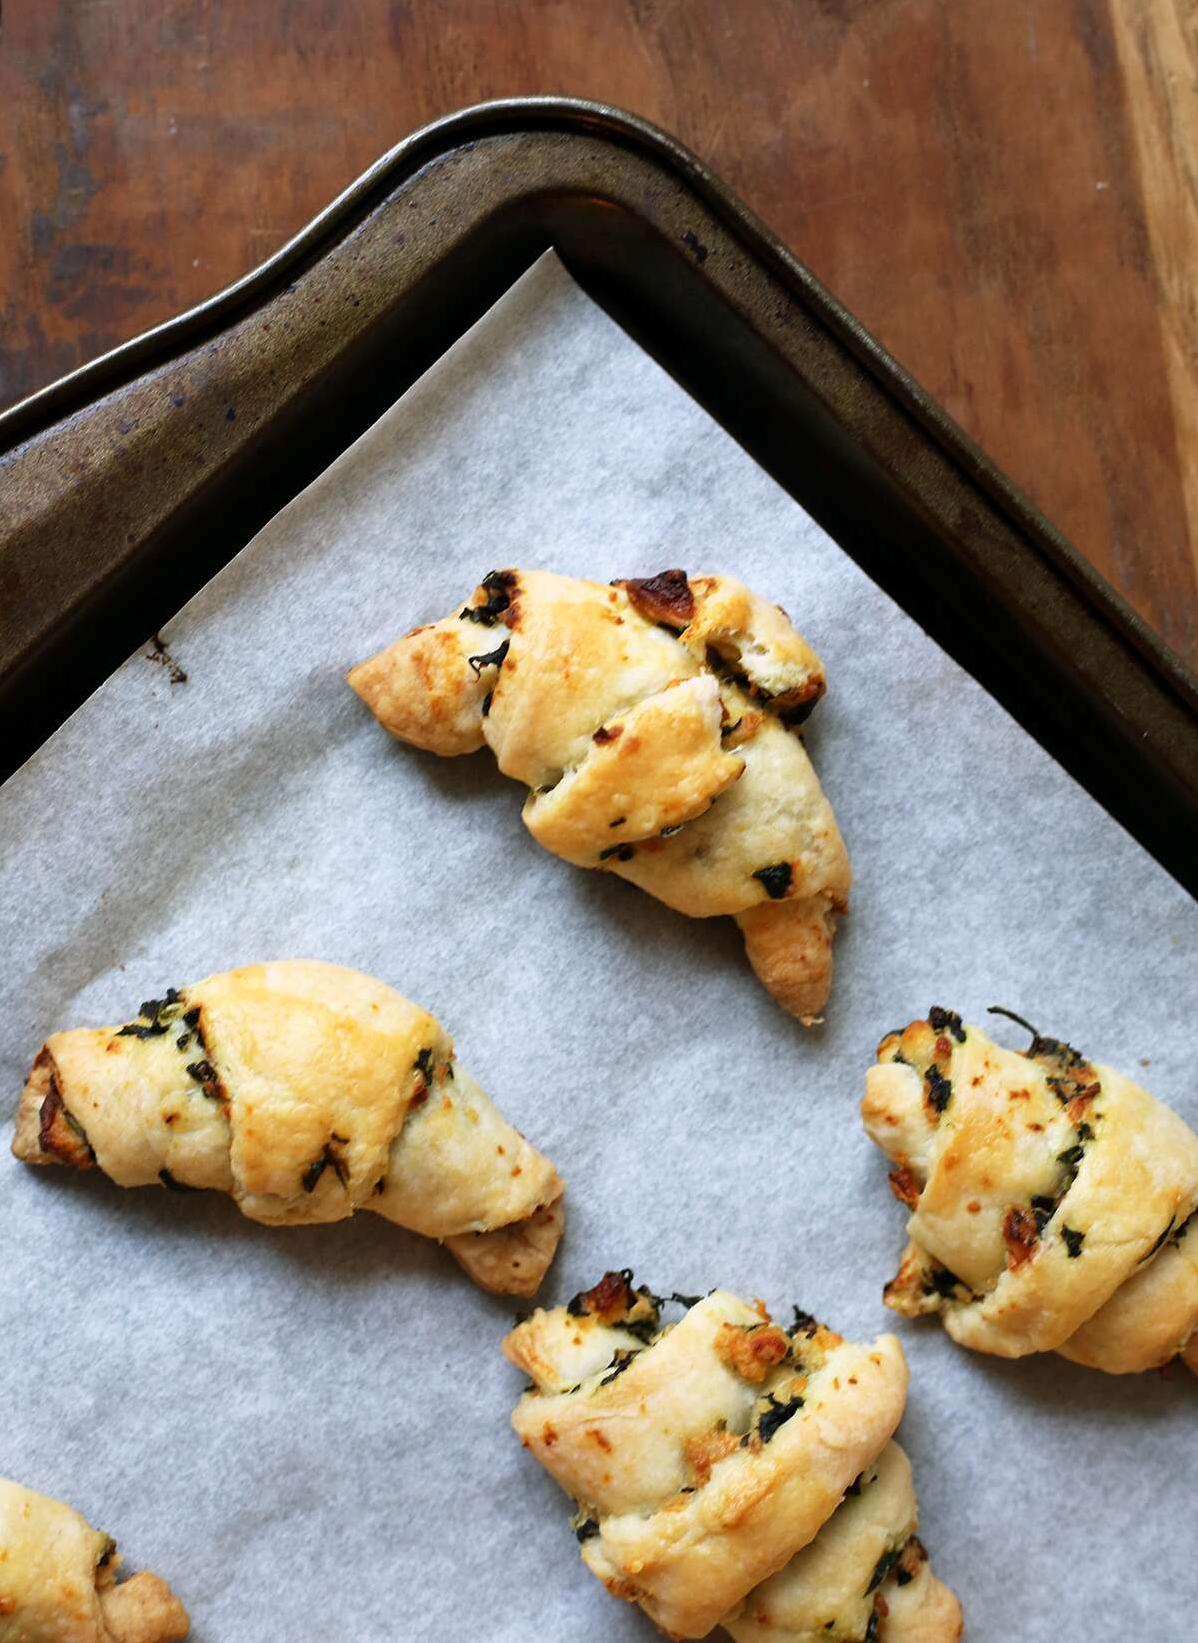  These savory rugelach are a perfect savory twist on a classic Jewish treat!